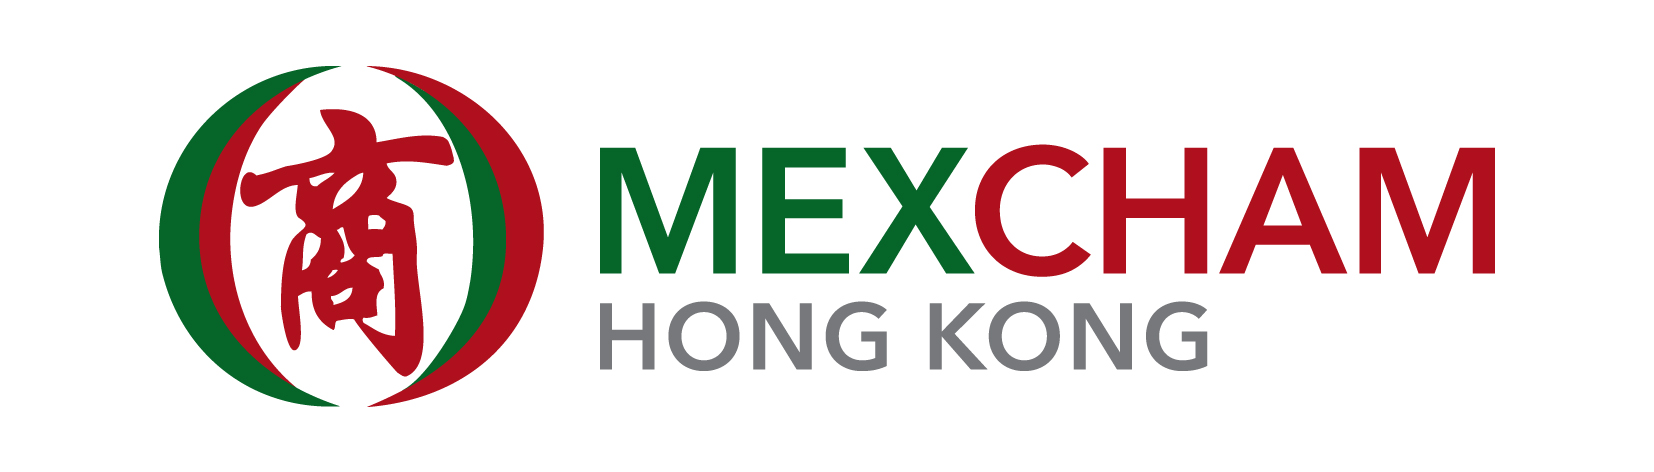 The Mexican Chamber of Commerce in Hong Kong